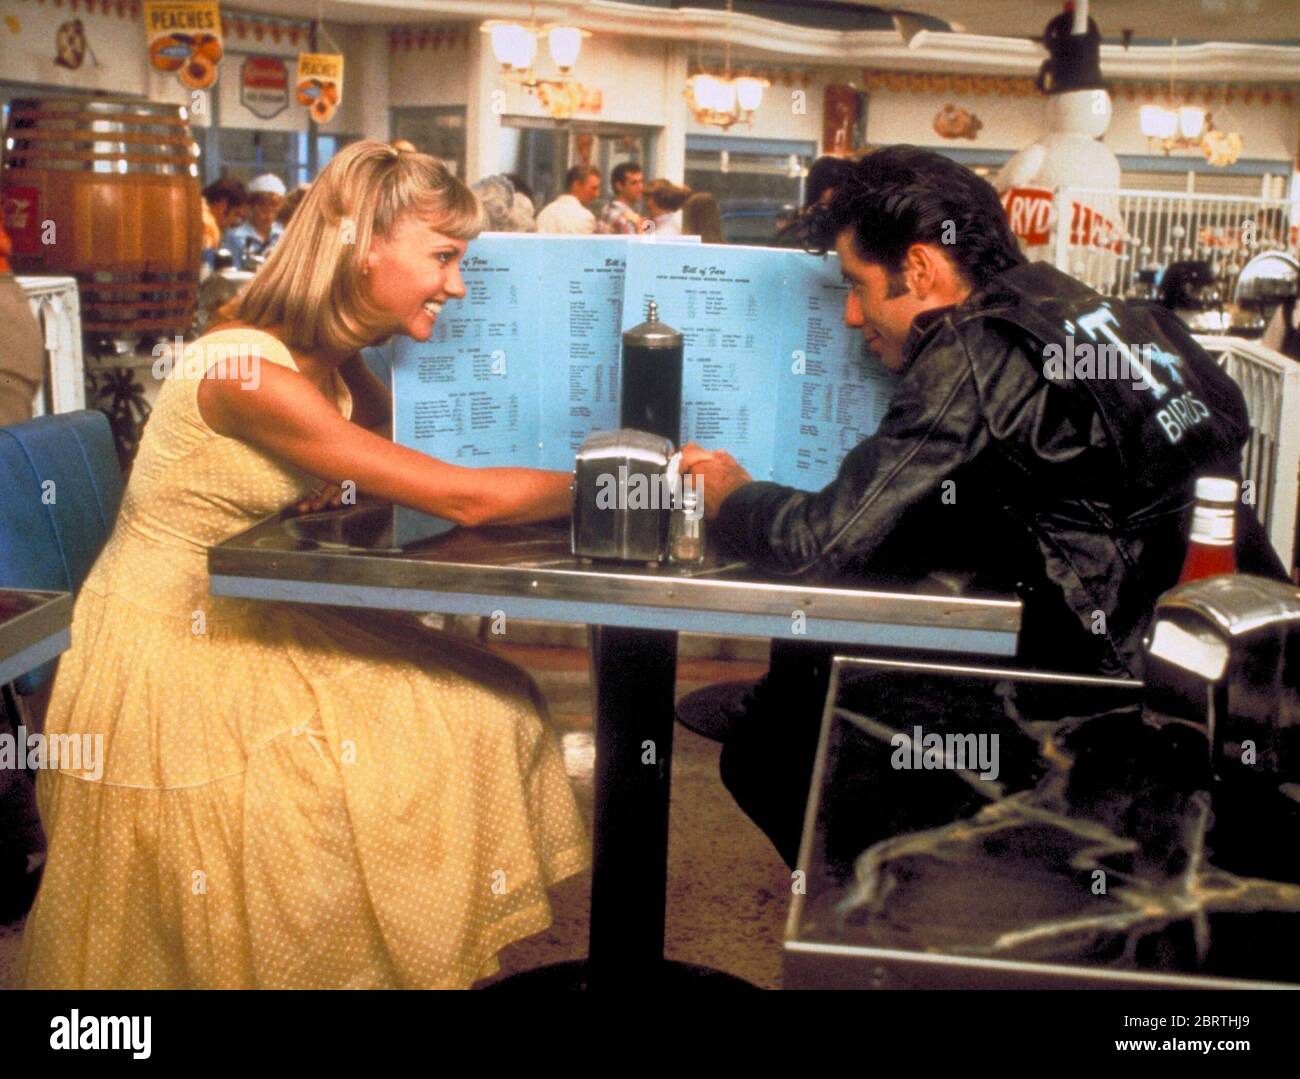 JOHN TRAVOLTA and OLIVIA NEWTON-JOHN in GREASE (1978), directed by RANDAL KLEISER. Credit: PARAMOUNT PICTURES / Album Stock Photo